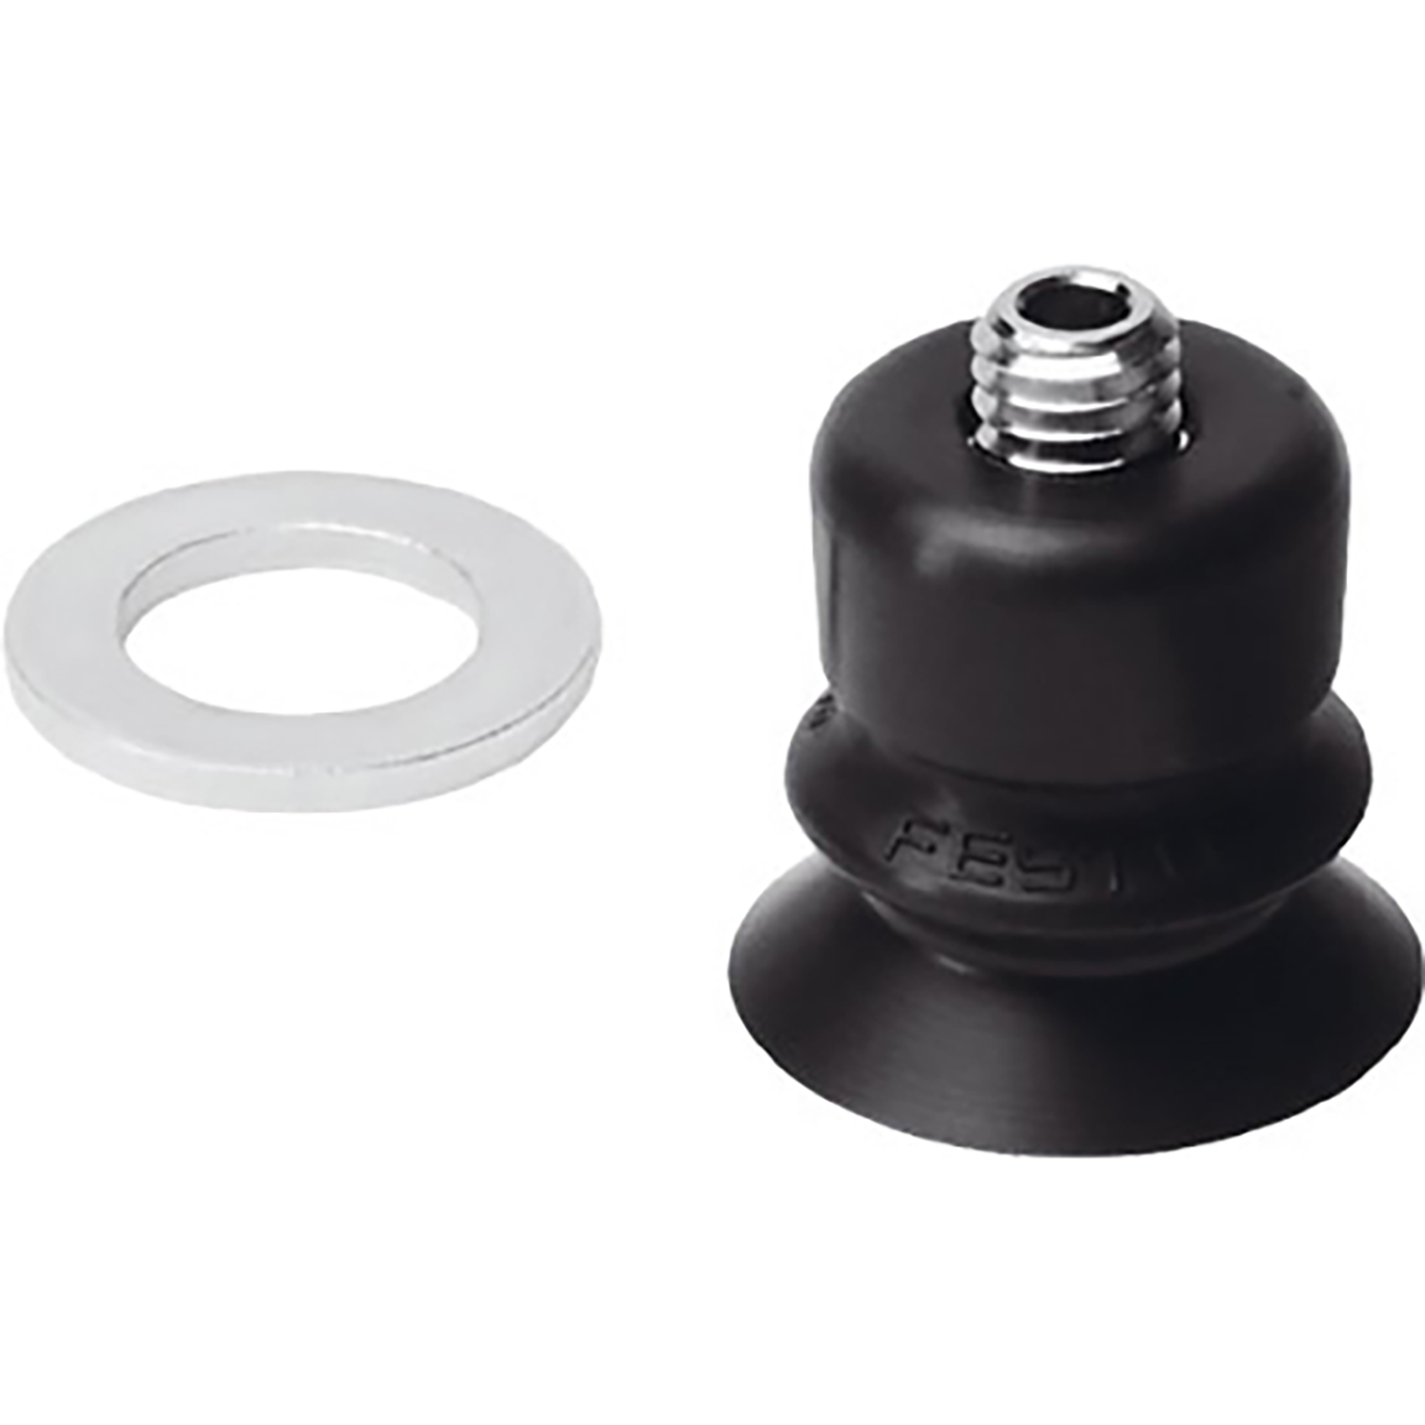 ESS-30-BU SUCTION CUP